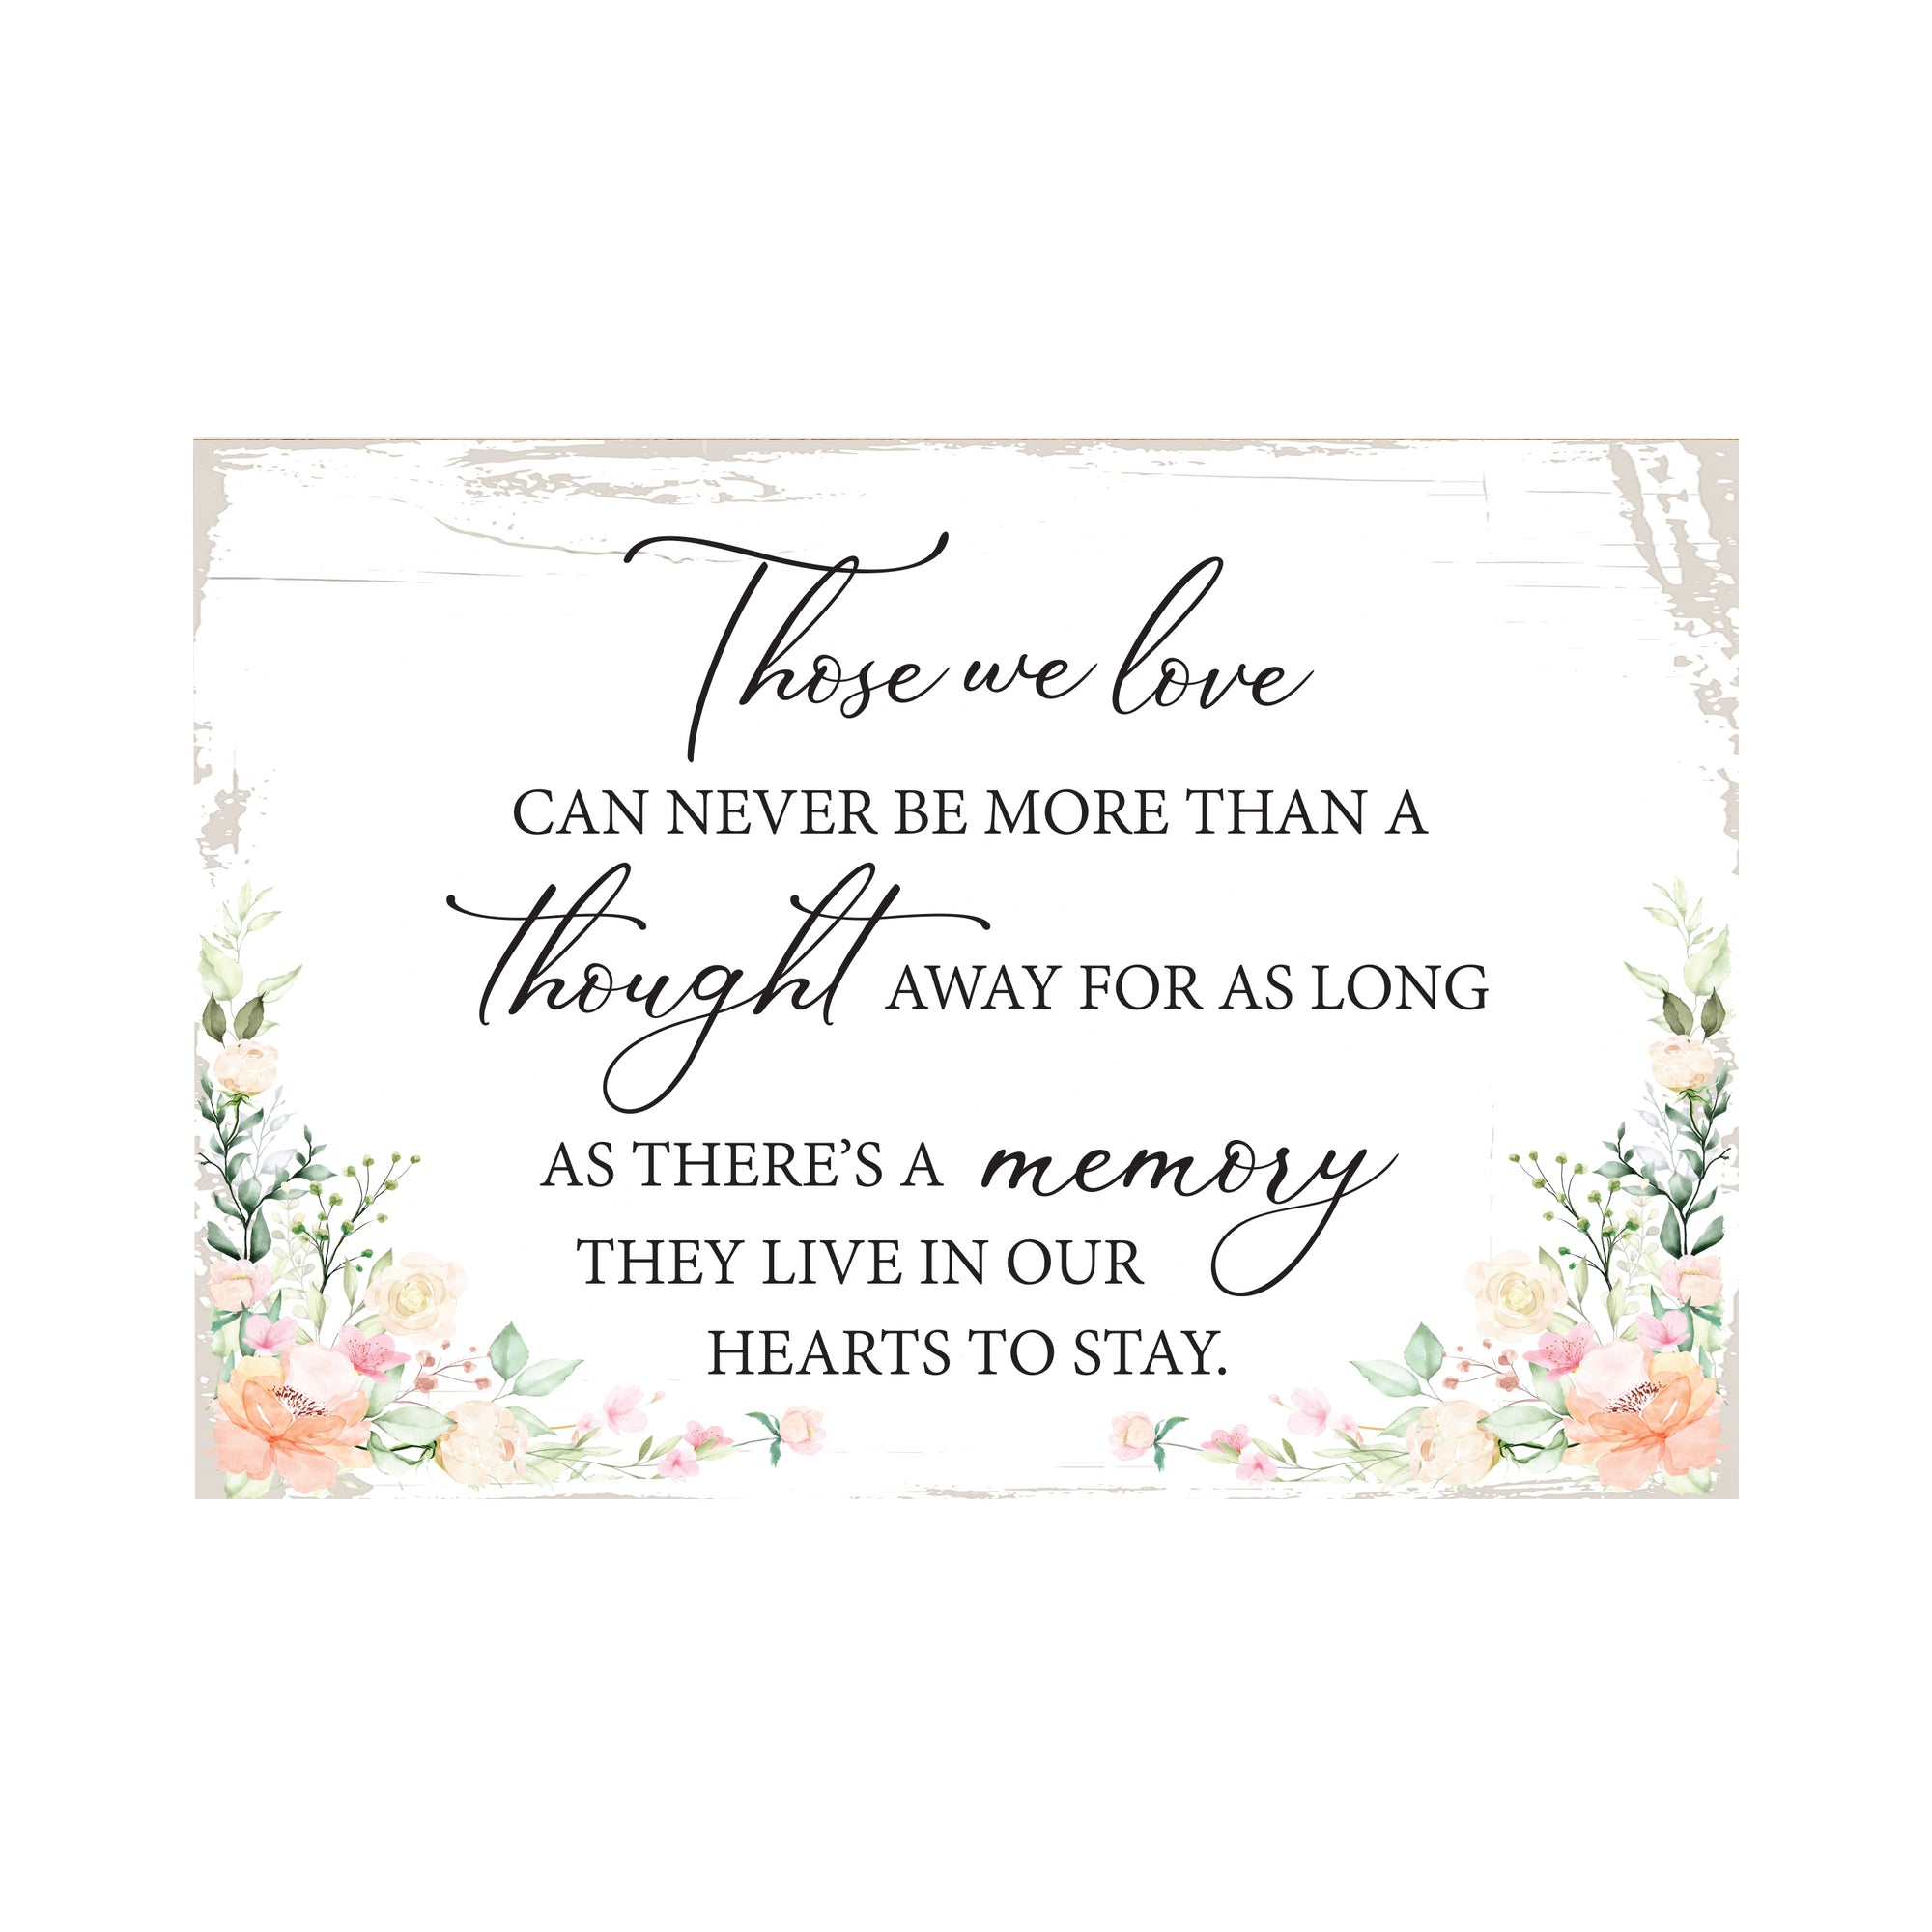 Those We Love Wooden Floral 5.5x8 Inches Memorial Art Sign Table Top and shelf decor For Home Décor